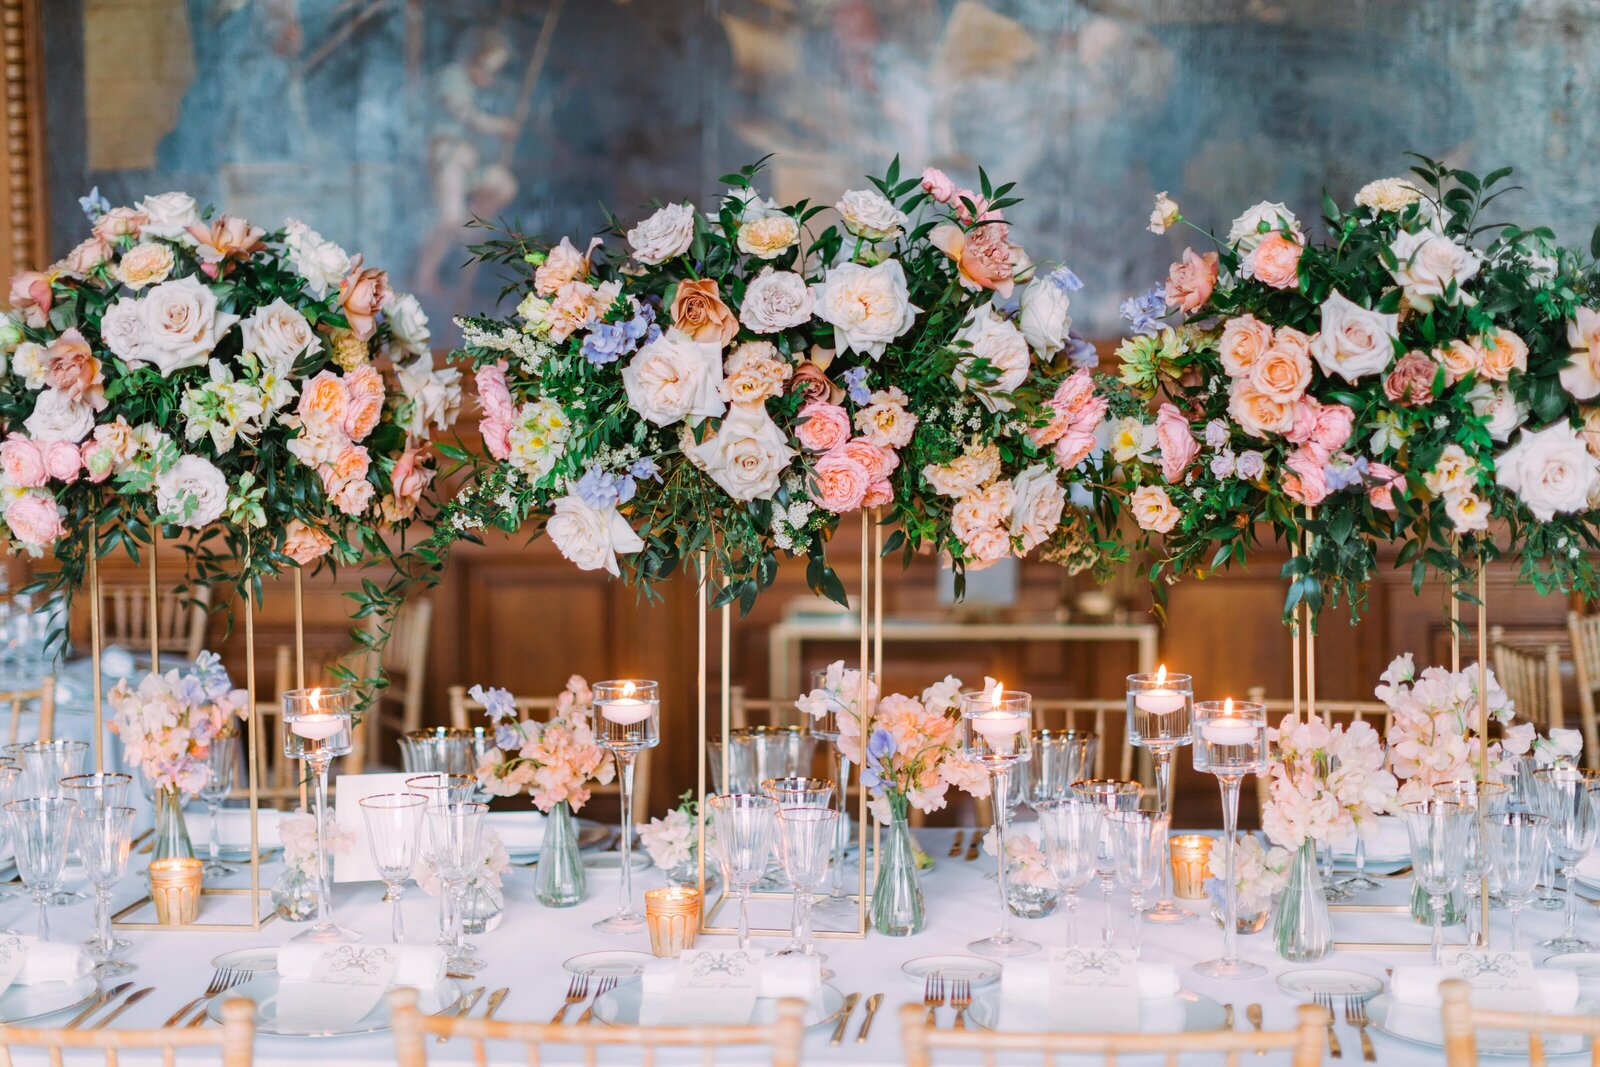 luxury_wedding_table_with_paste_pink_purple_roses_flowers_chateau_domaine_photographer_france6